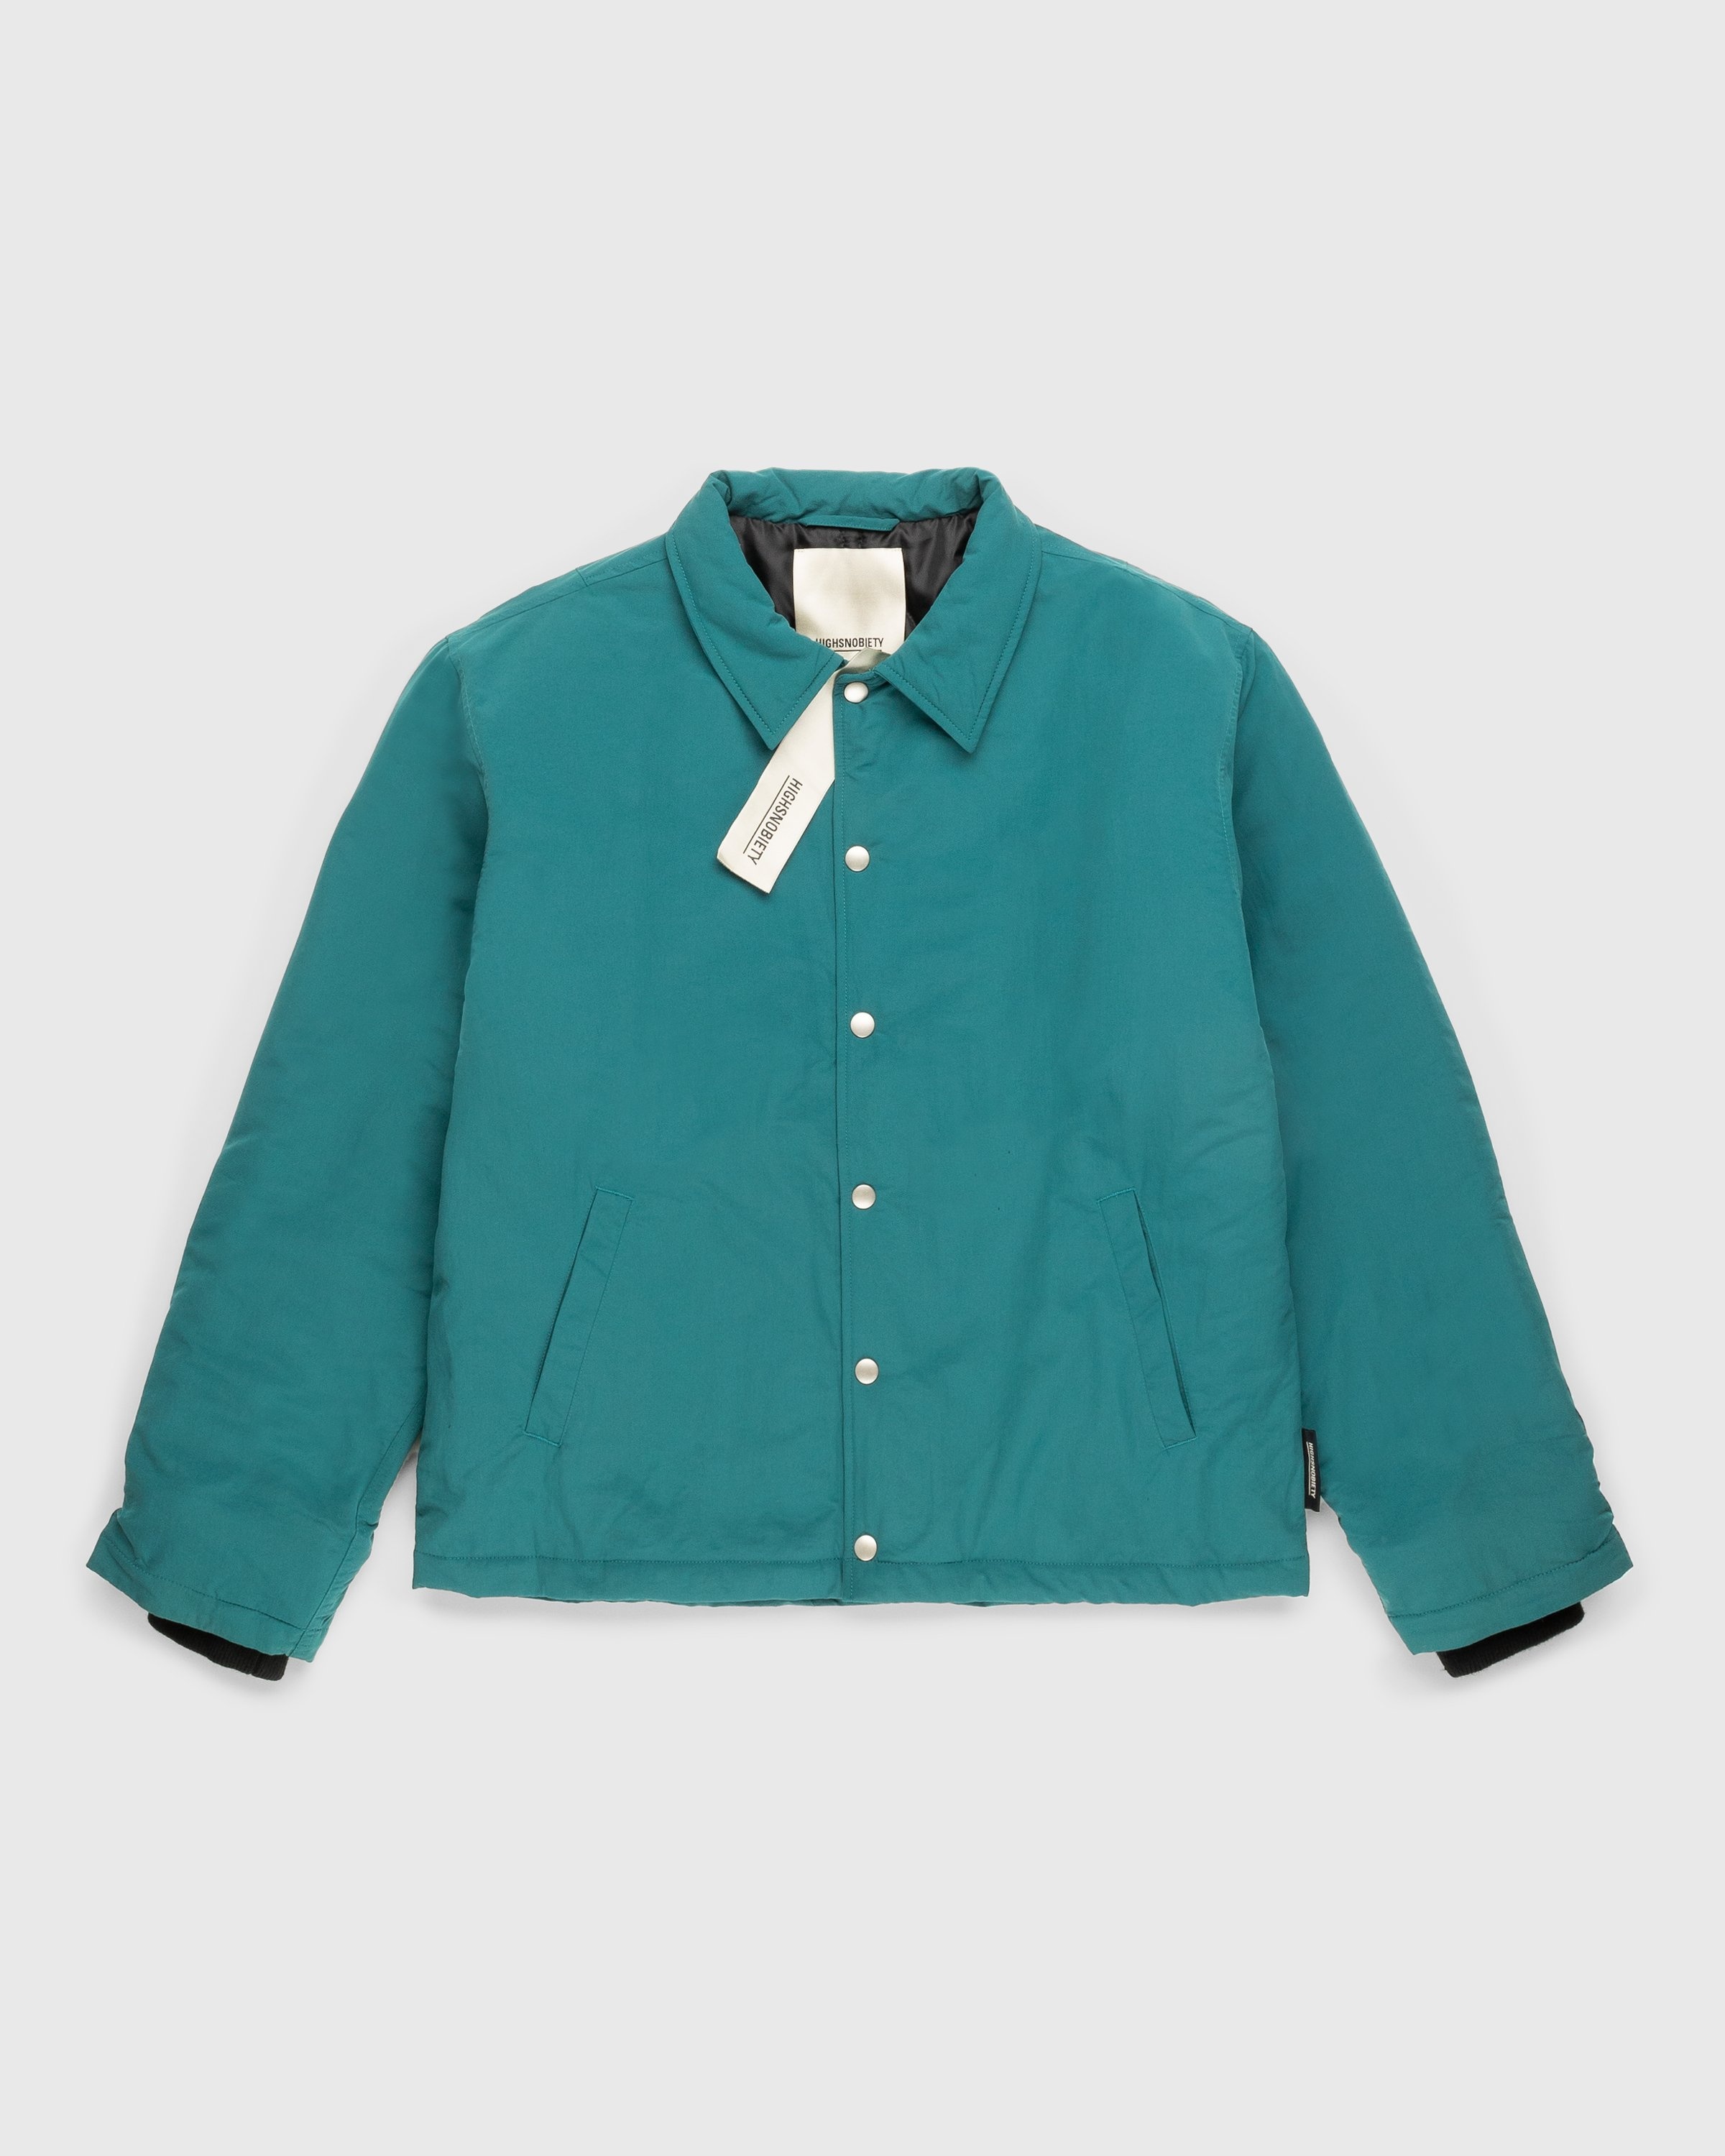 Highsnobiety – Insulated Coach Jacket Sea Green - Outerwear - Green - Image 1